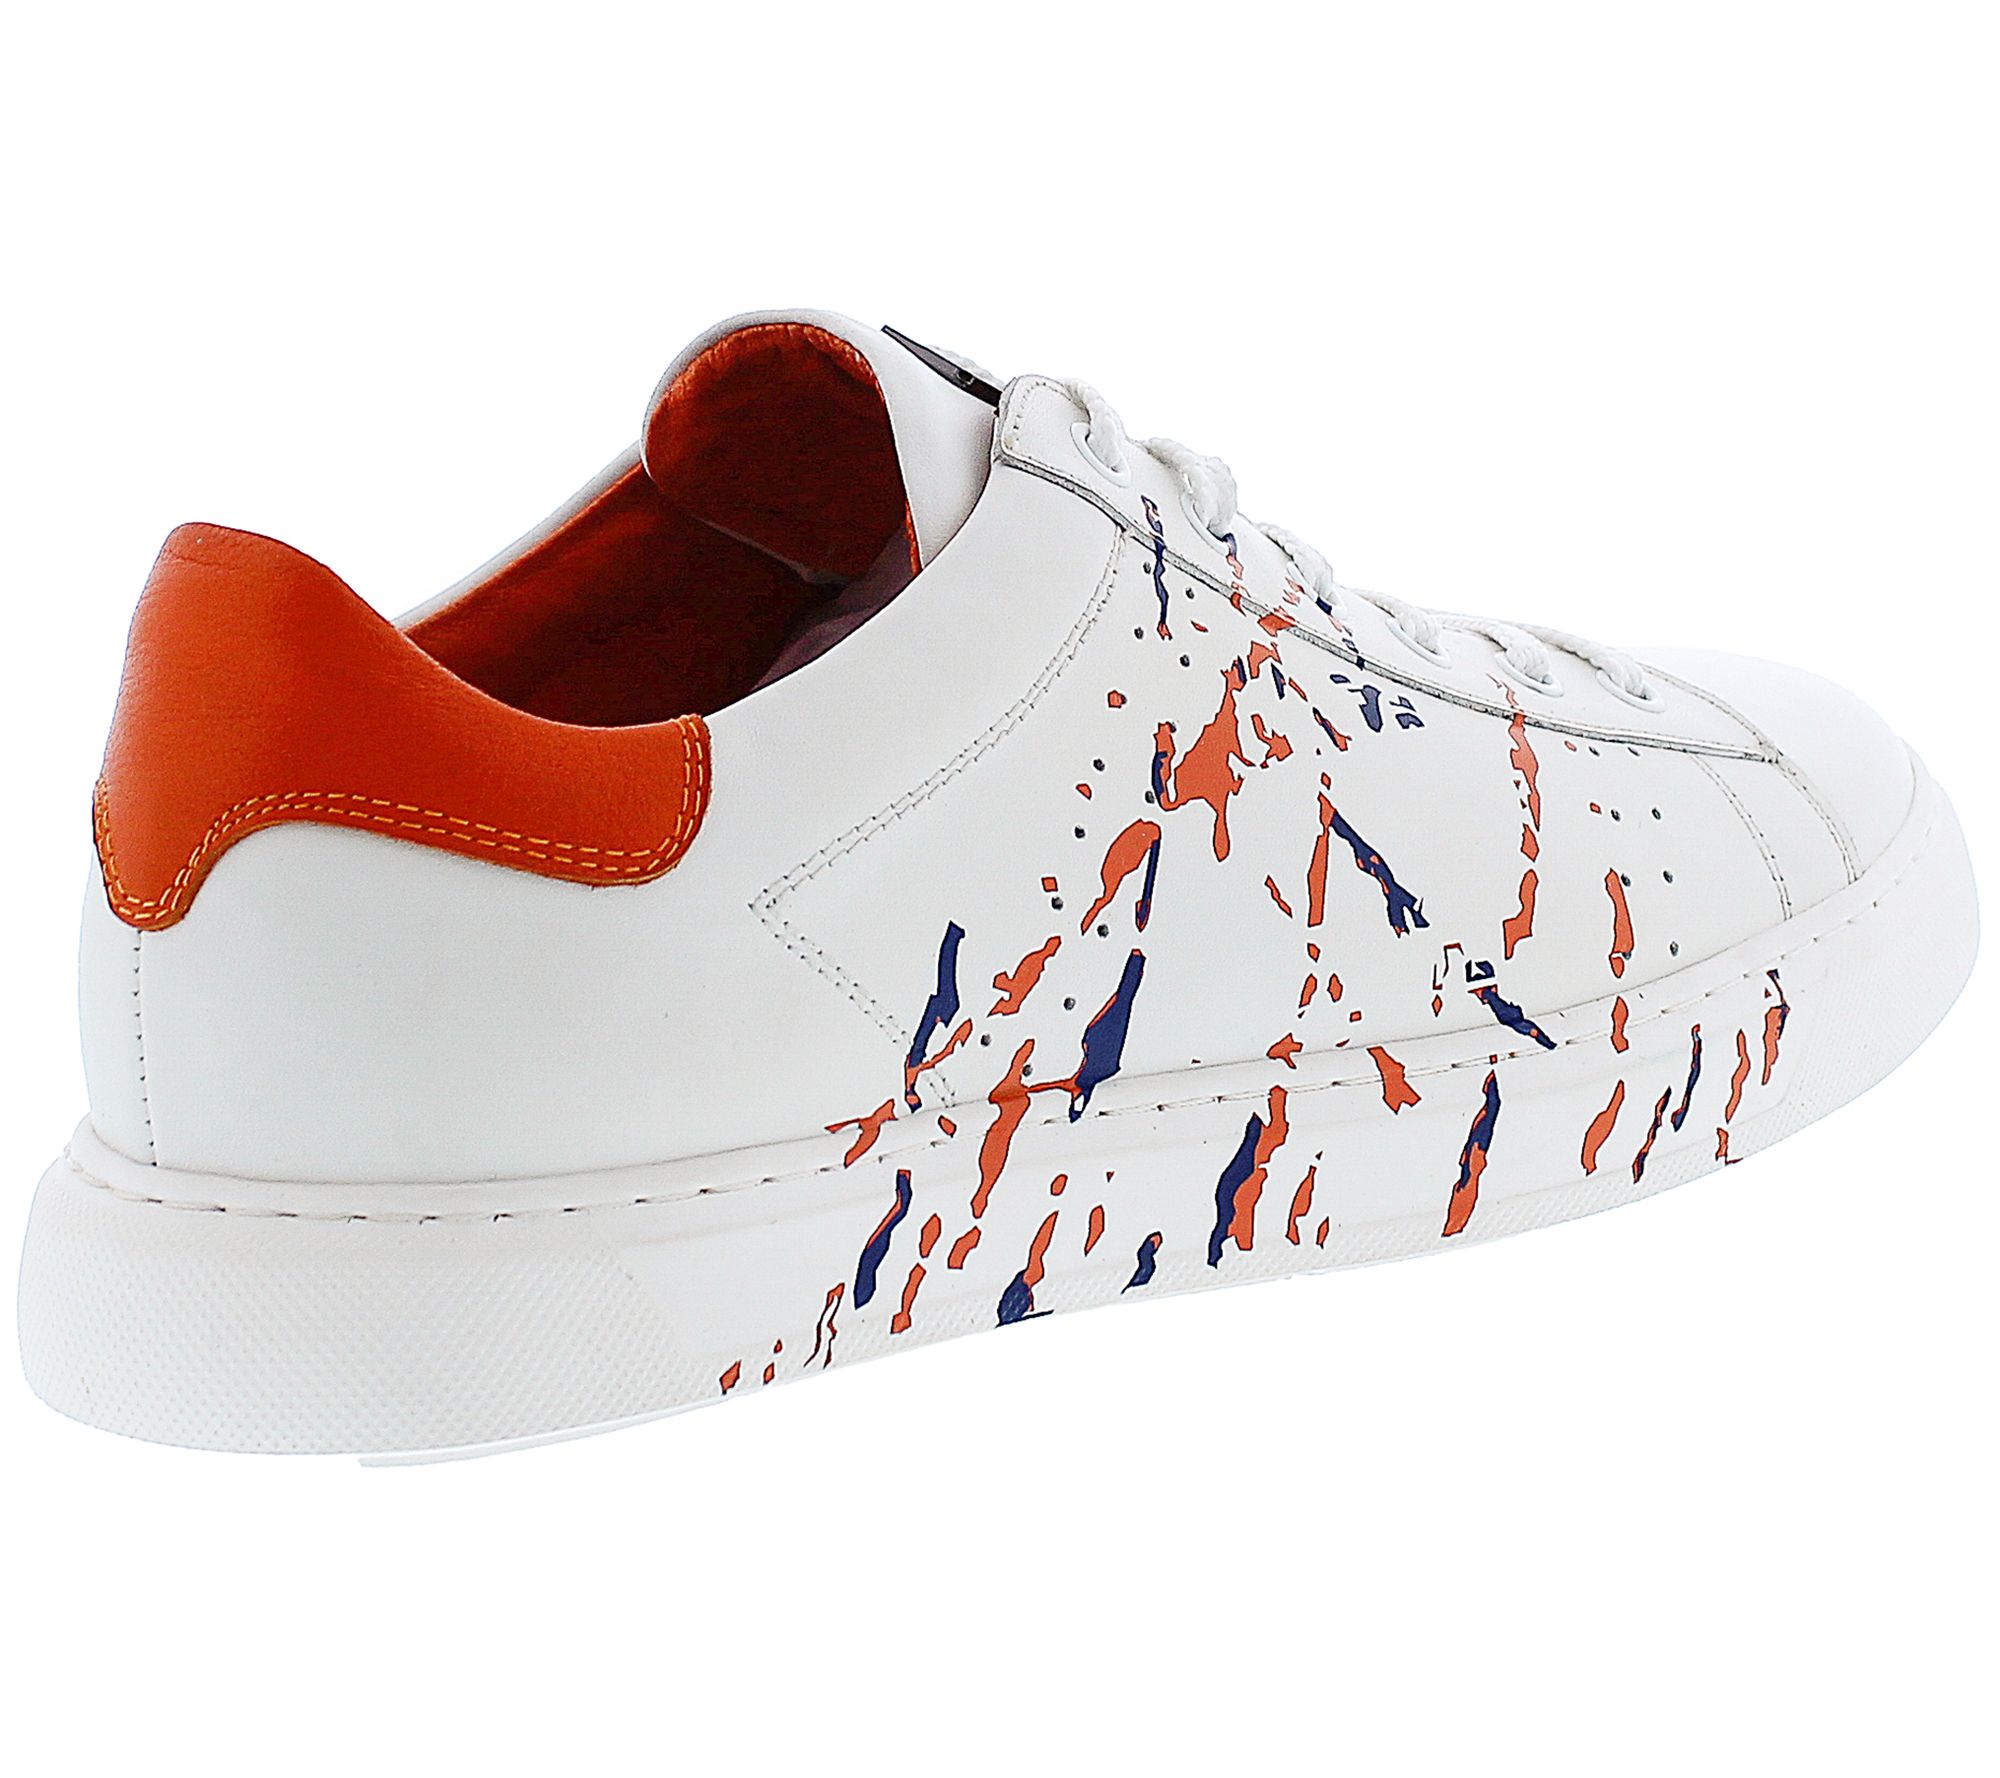 Robert Graham Men's Leather Lace Up Sneakers - Immersion - QVC.com